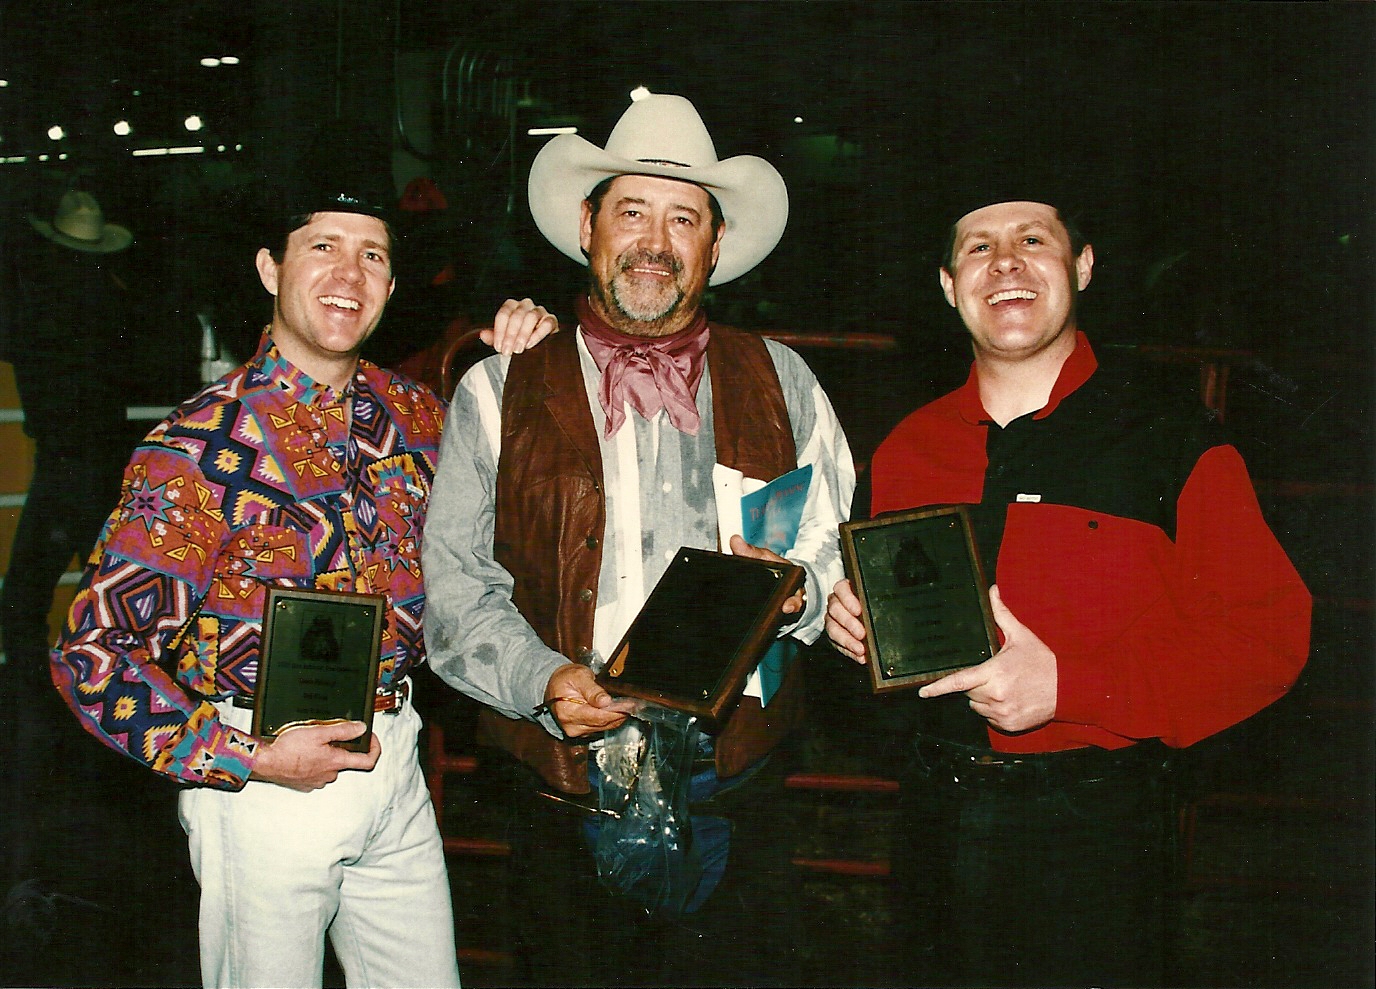 Butch McCain, Barry Corbin and Ben McCain at the Lazy E Arena in Oklahoma City.